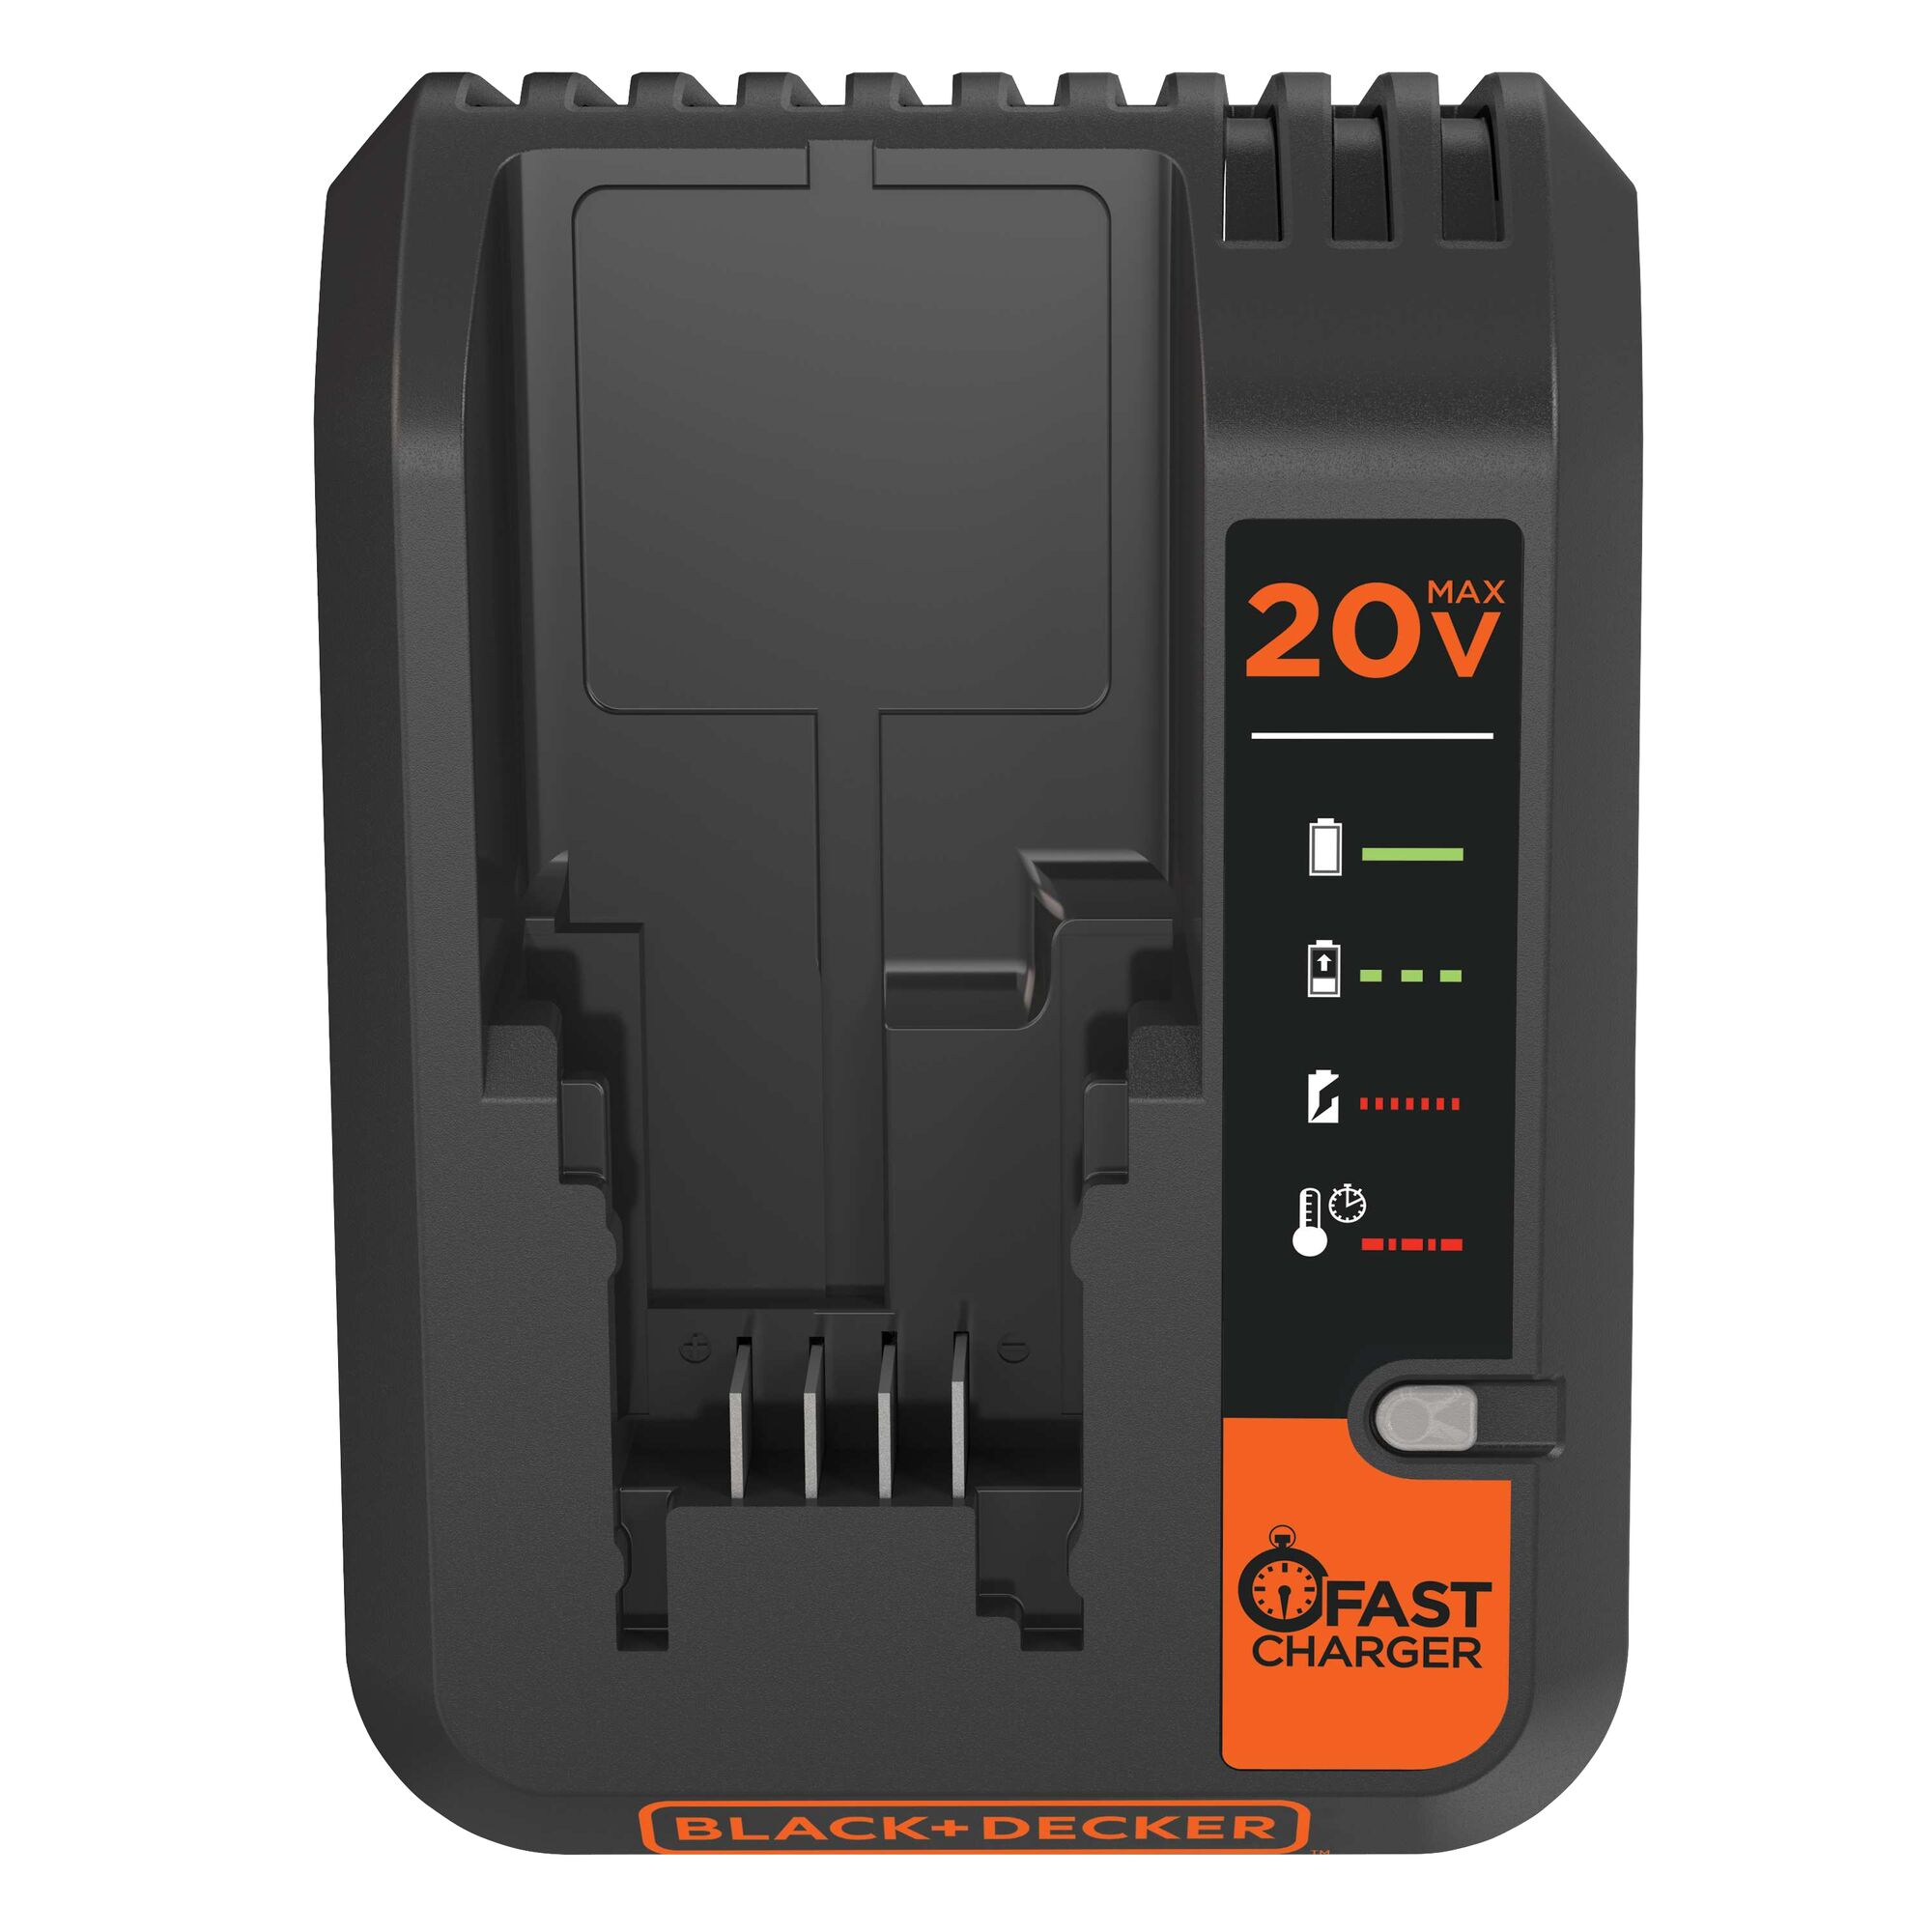 Top profile of black and decker lithium fast charger.